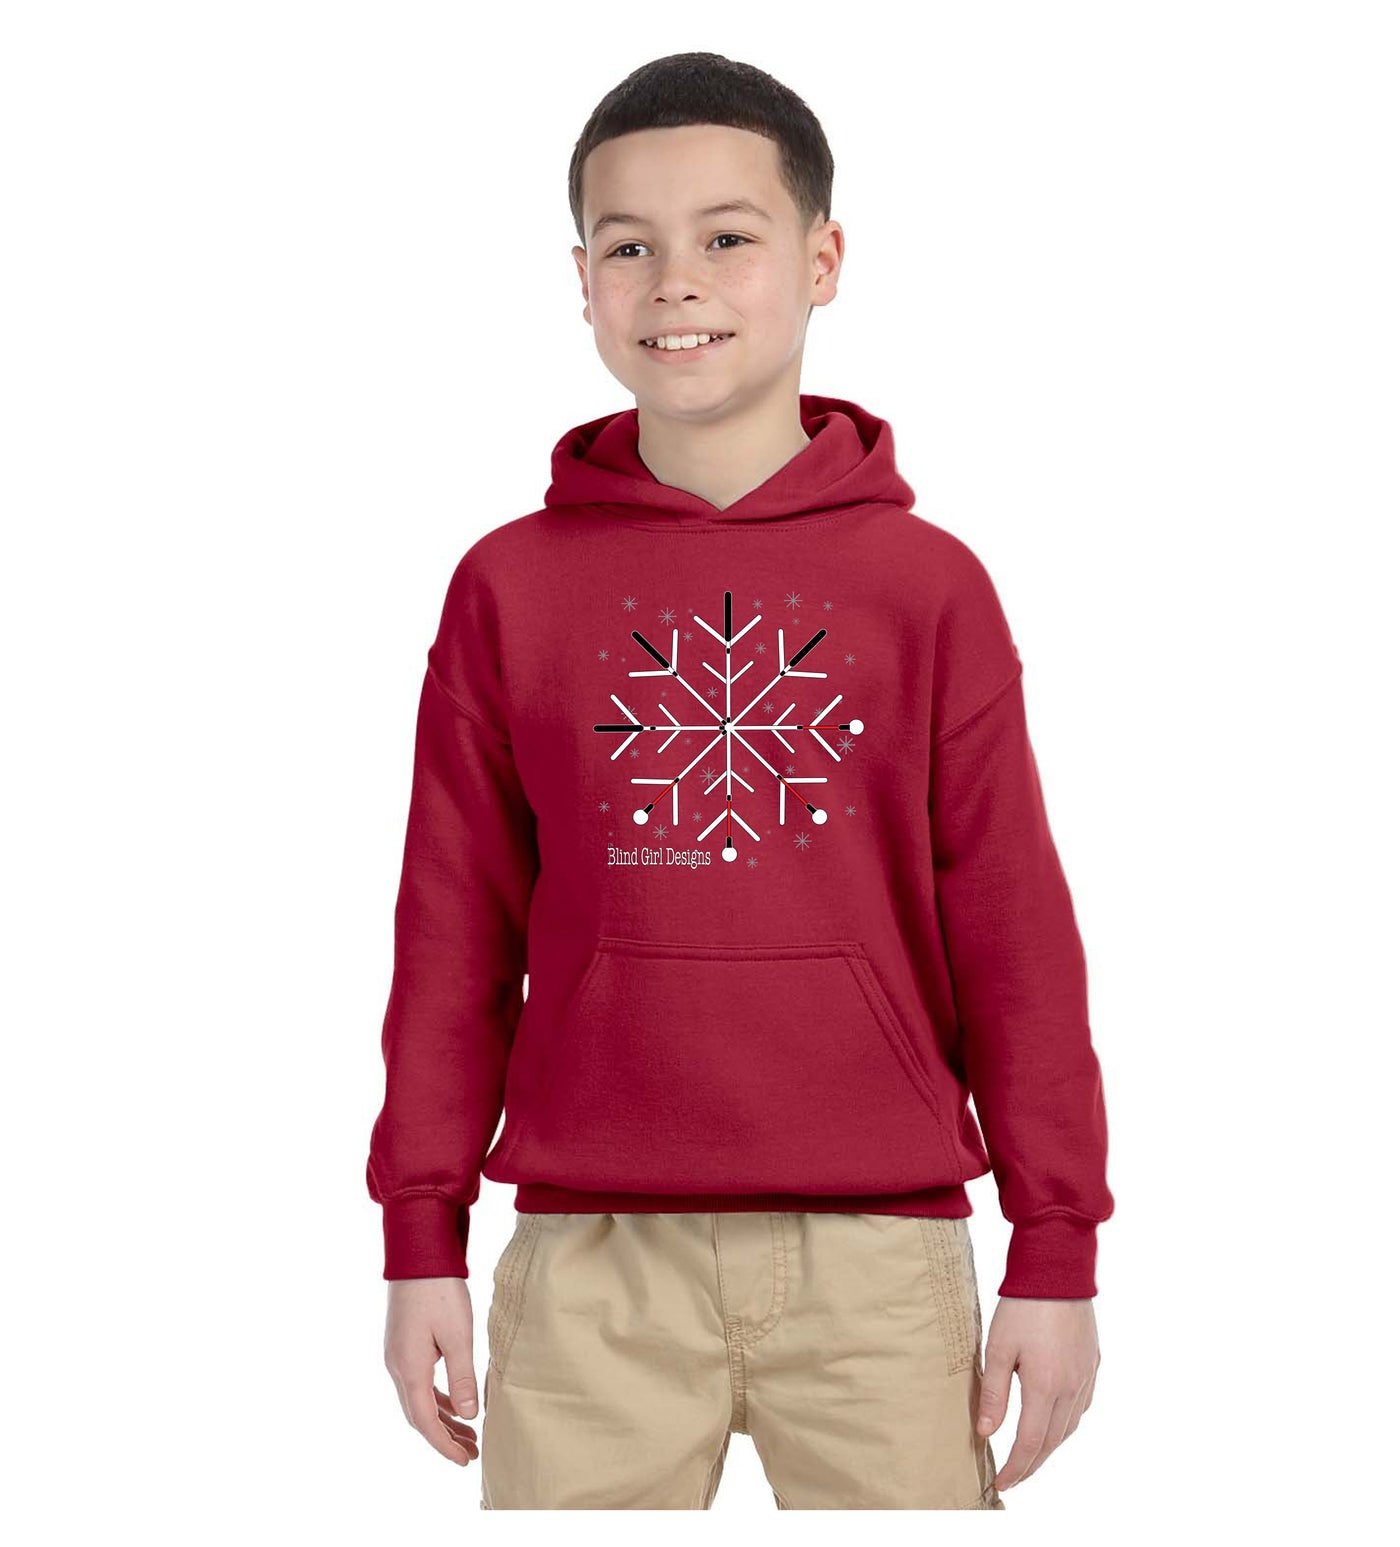 Kids and Toddlers Snowflake White Cane Hoodie - Red